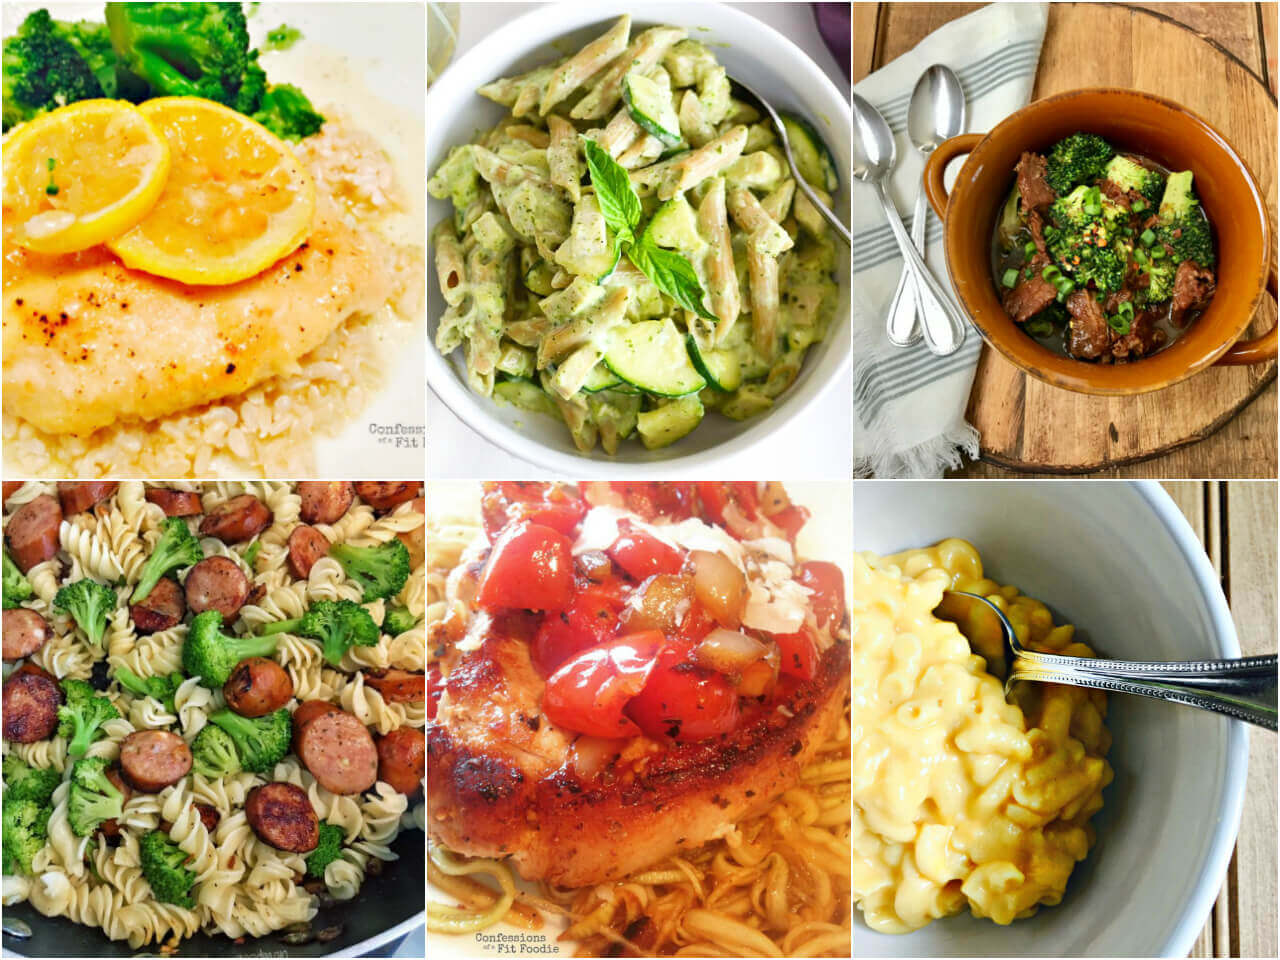 21 Day Fix Meal Ideas